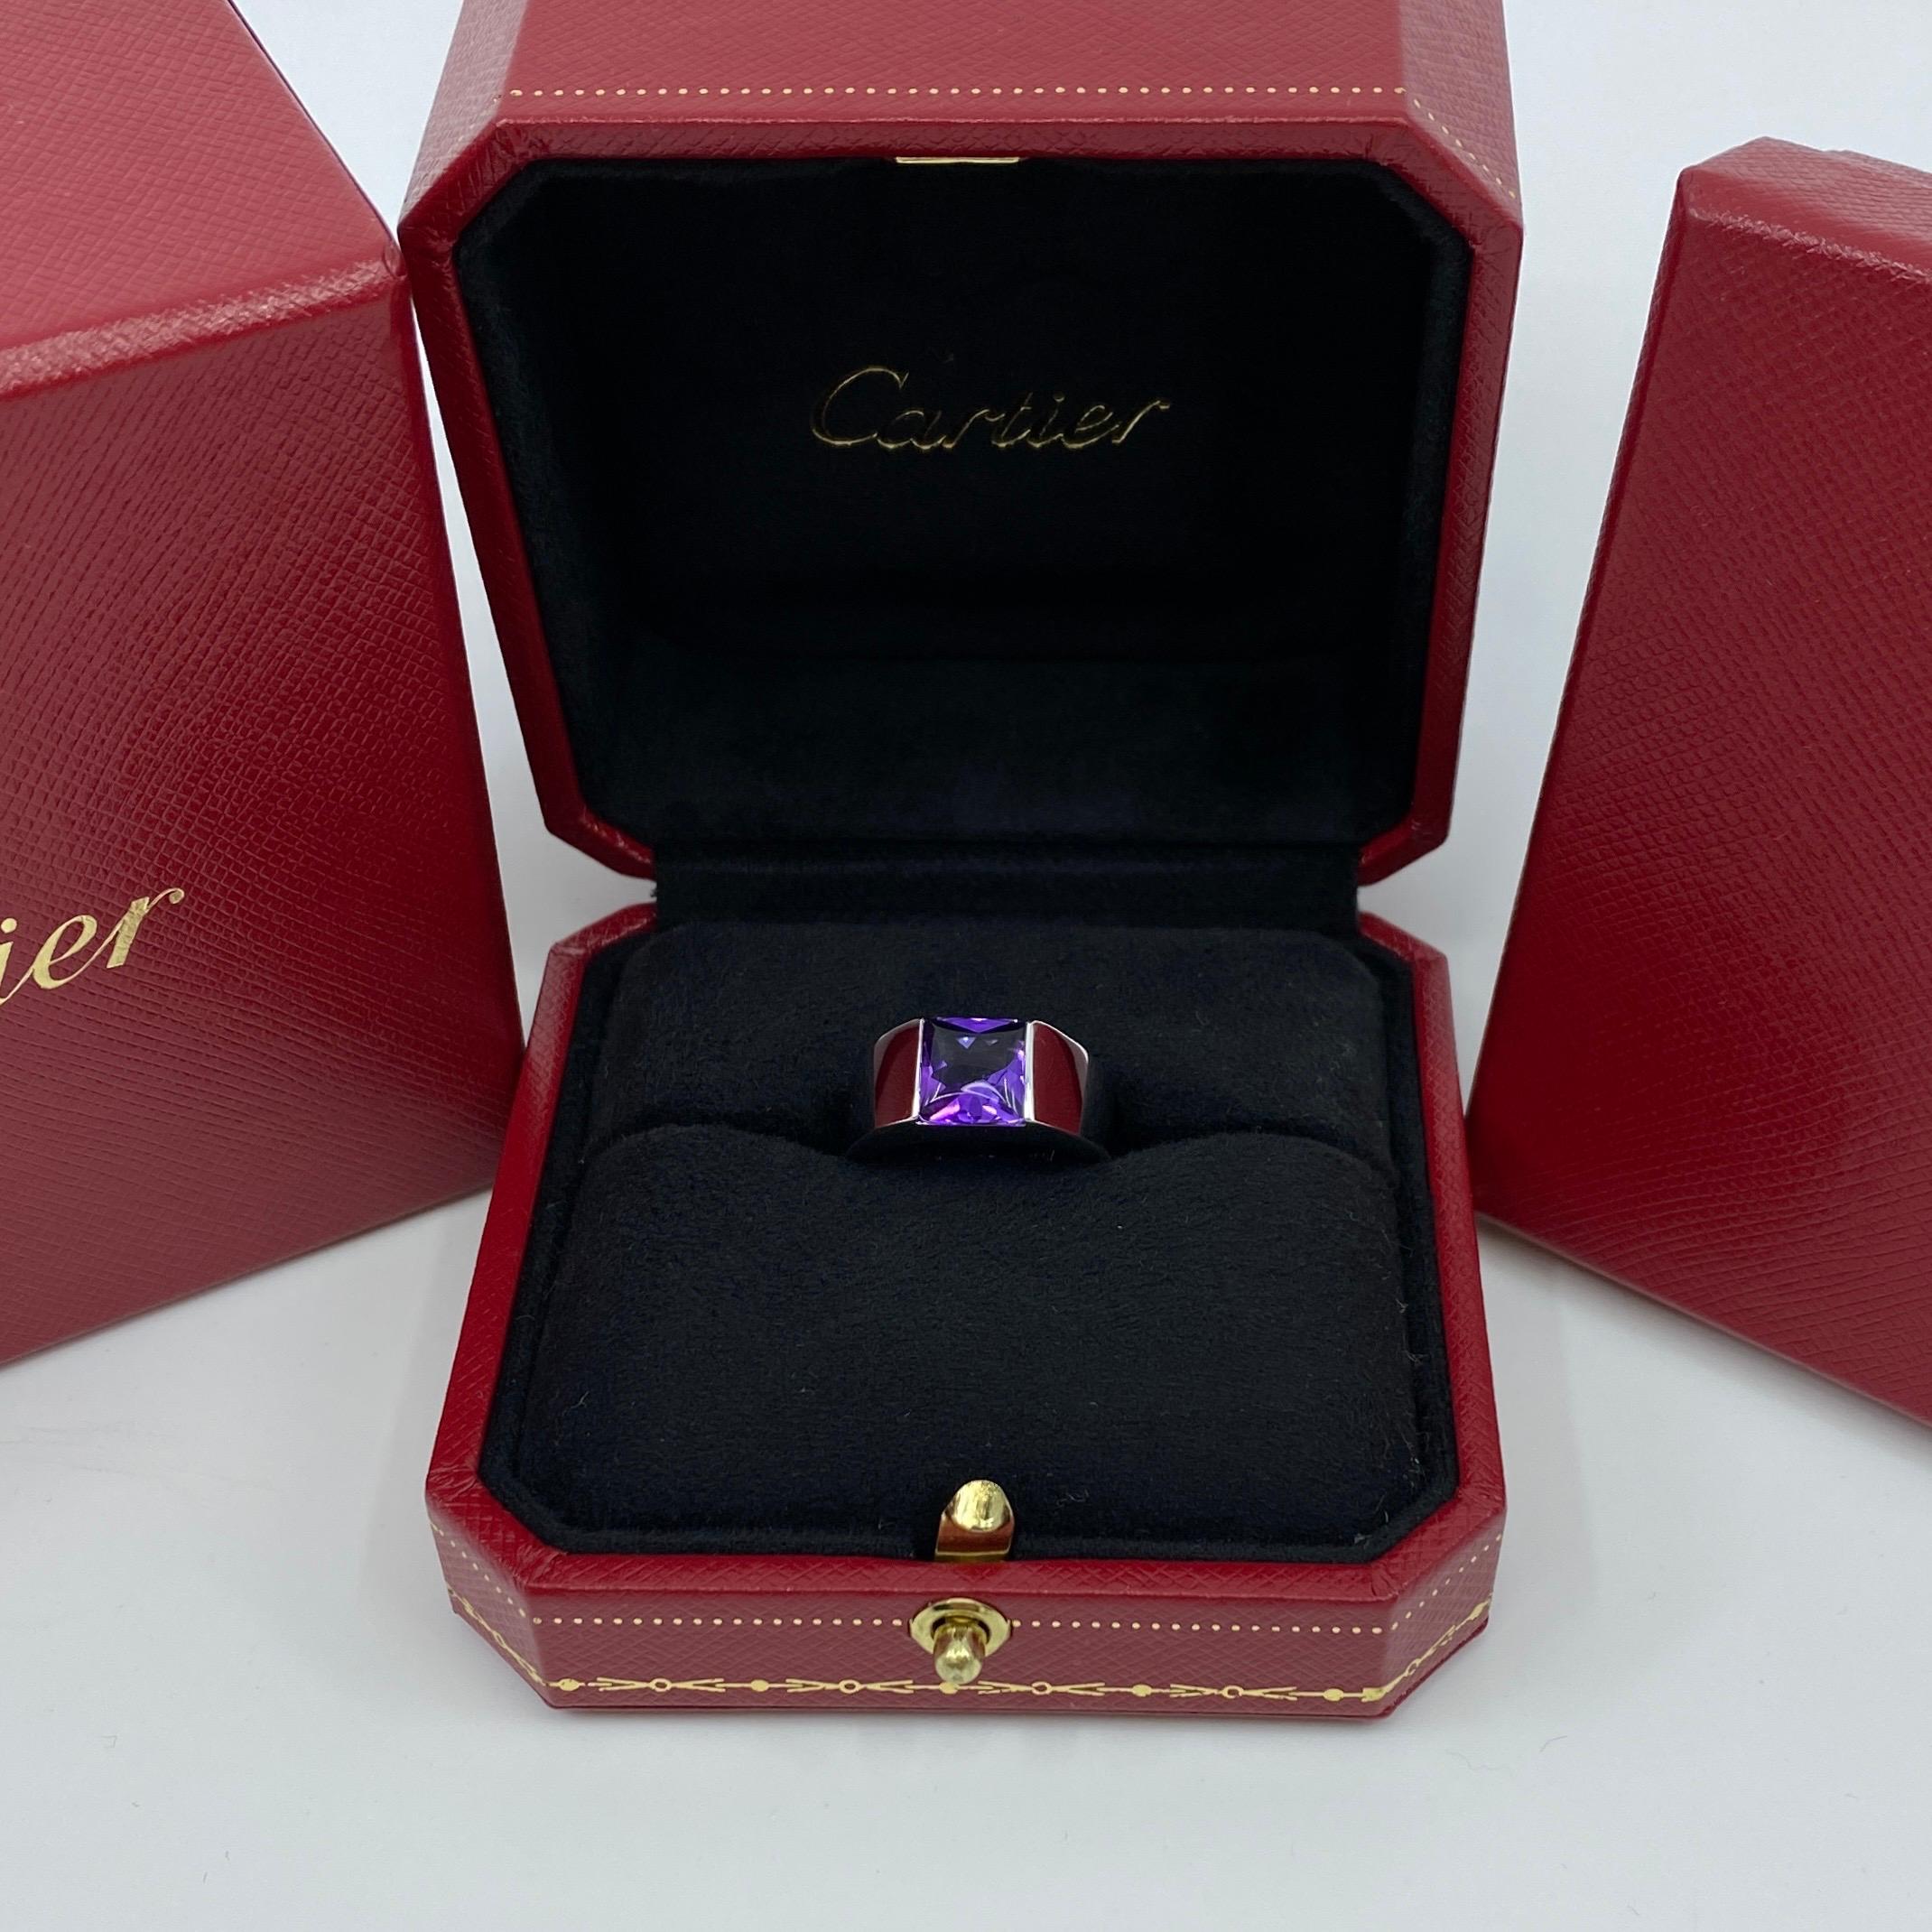 Cartier Purple Amethyst 18 Karat White Gold Tank Ring.

Stunning white gold ring with a large 8mm tension set deep purple amethyst. Fine jewellery houses like Cartier only use the finest of gemstones and this amethyst is no exception. A top amethyst